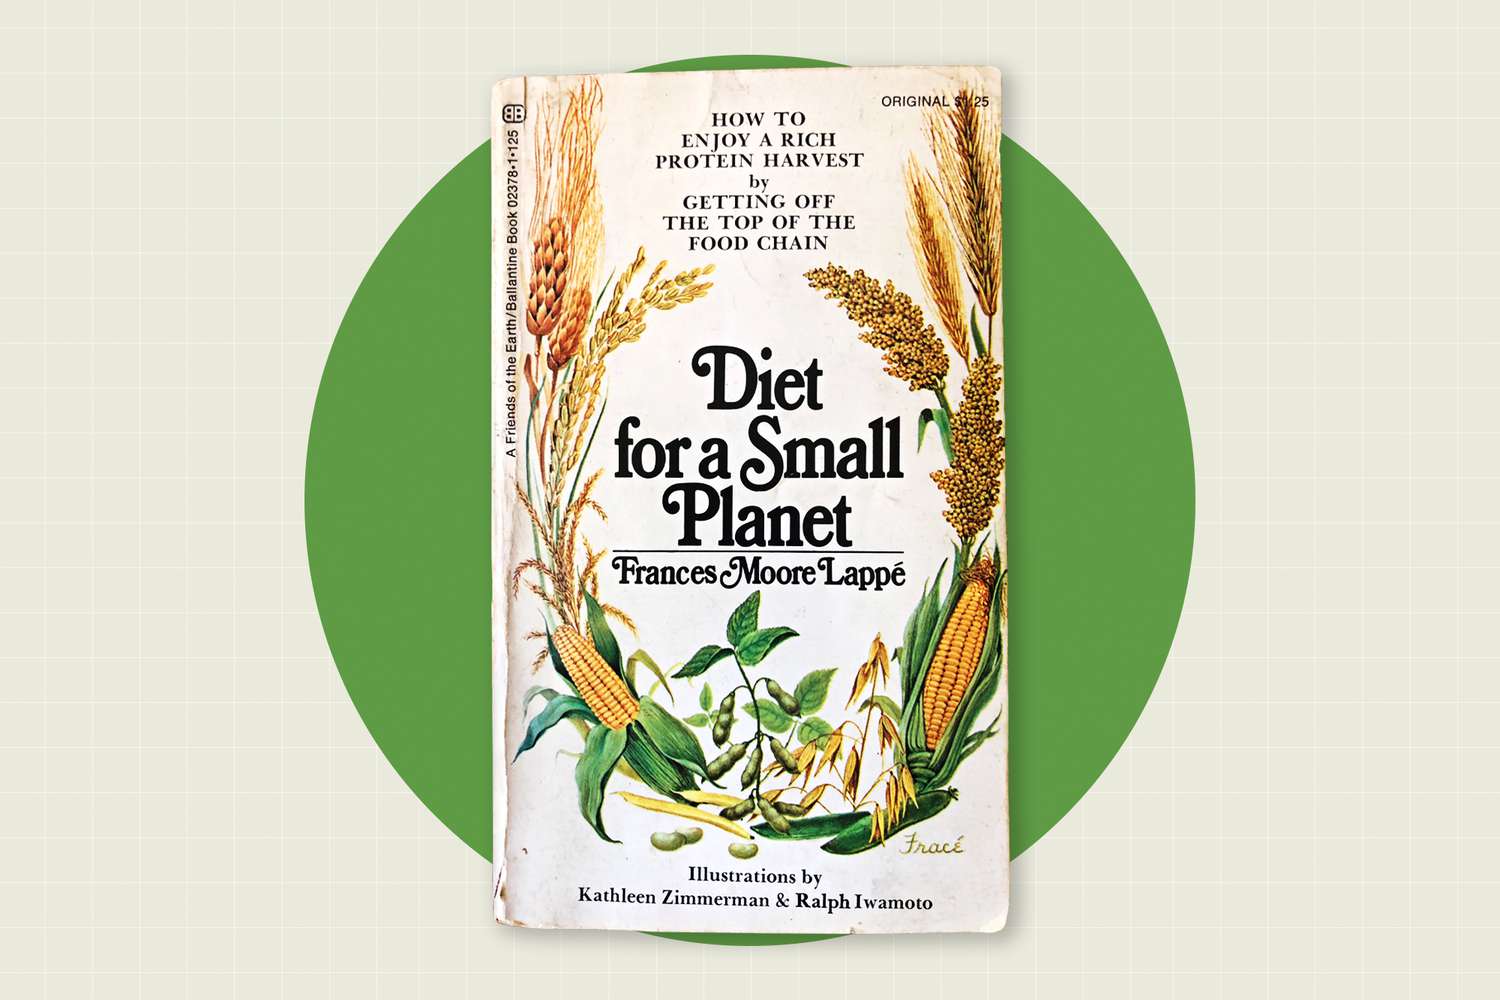 A photo of a book titled Diet for a Small Planet by Francees Moore Lappe on a designed background